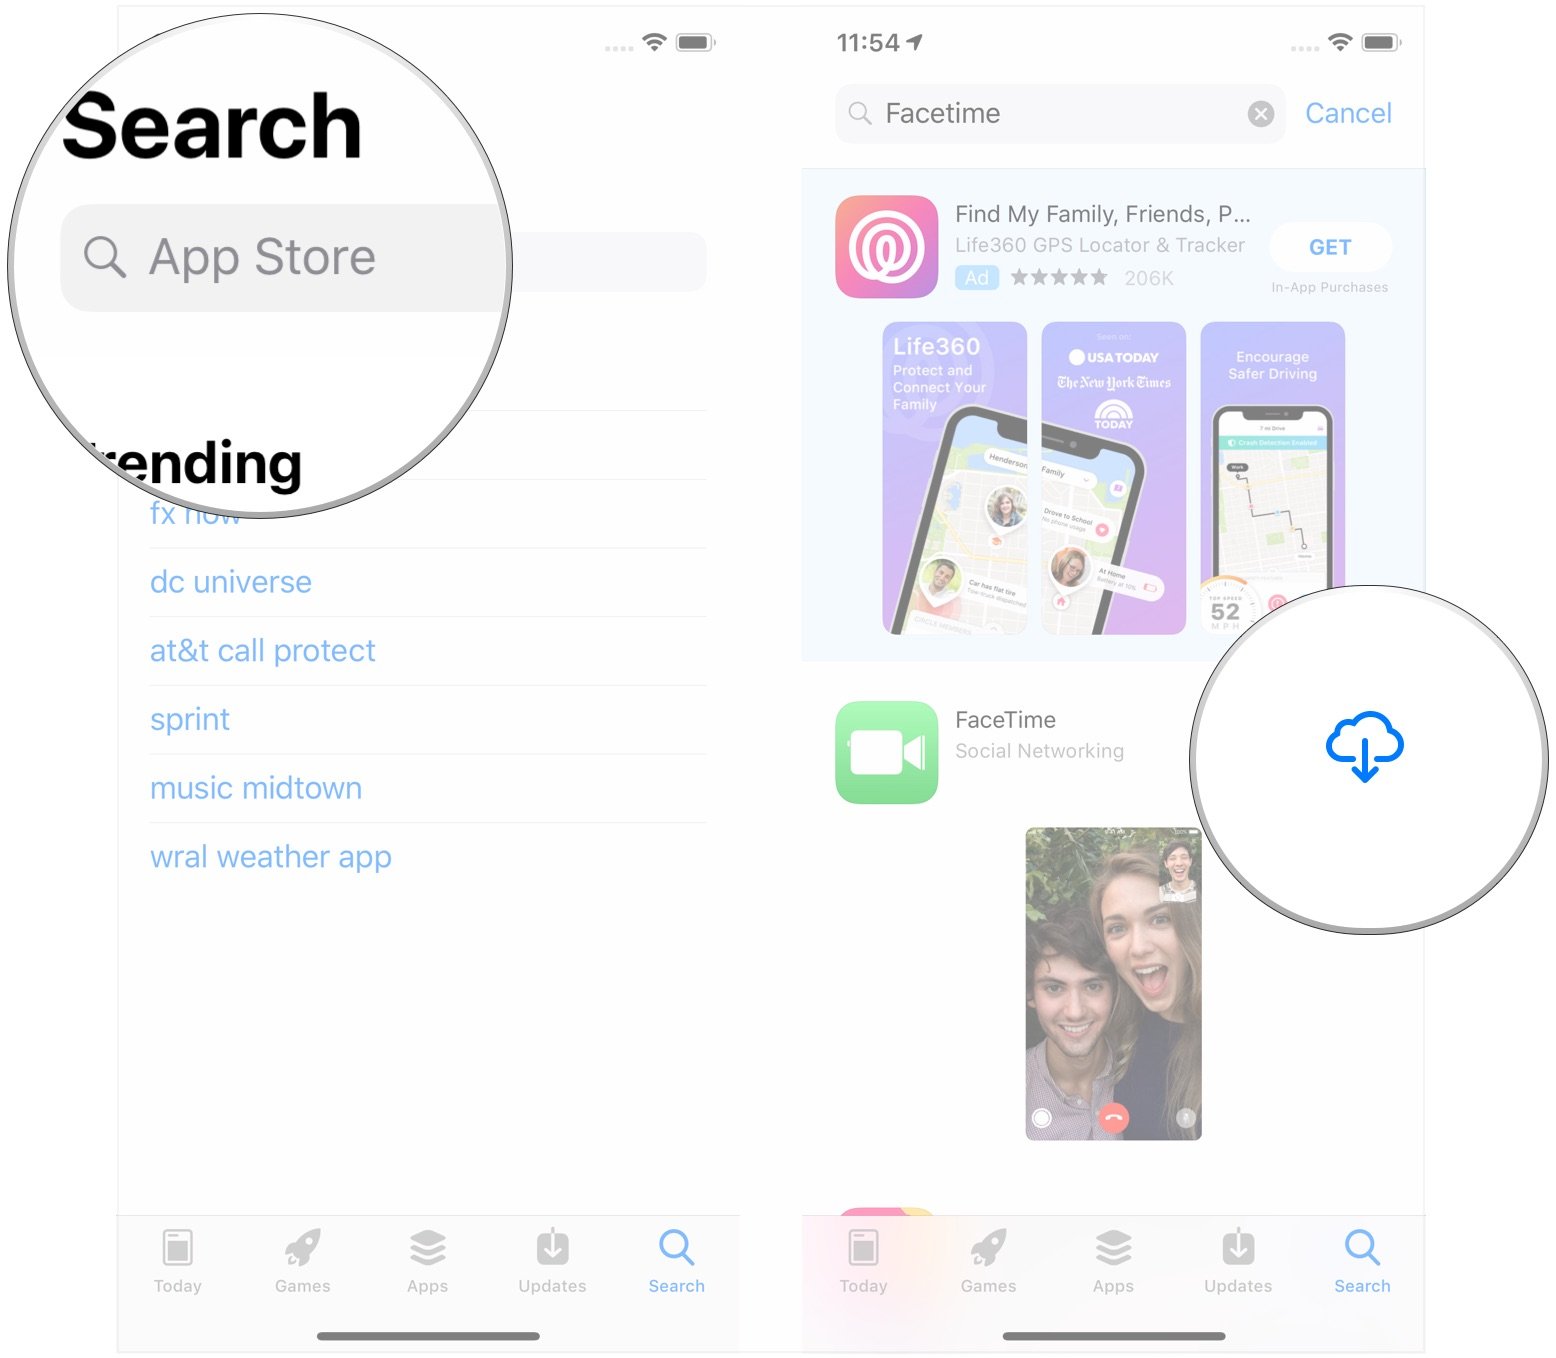 Search for FaceTime, tap Download button